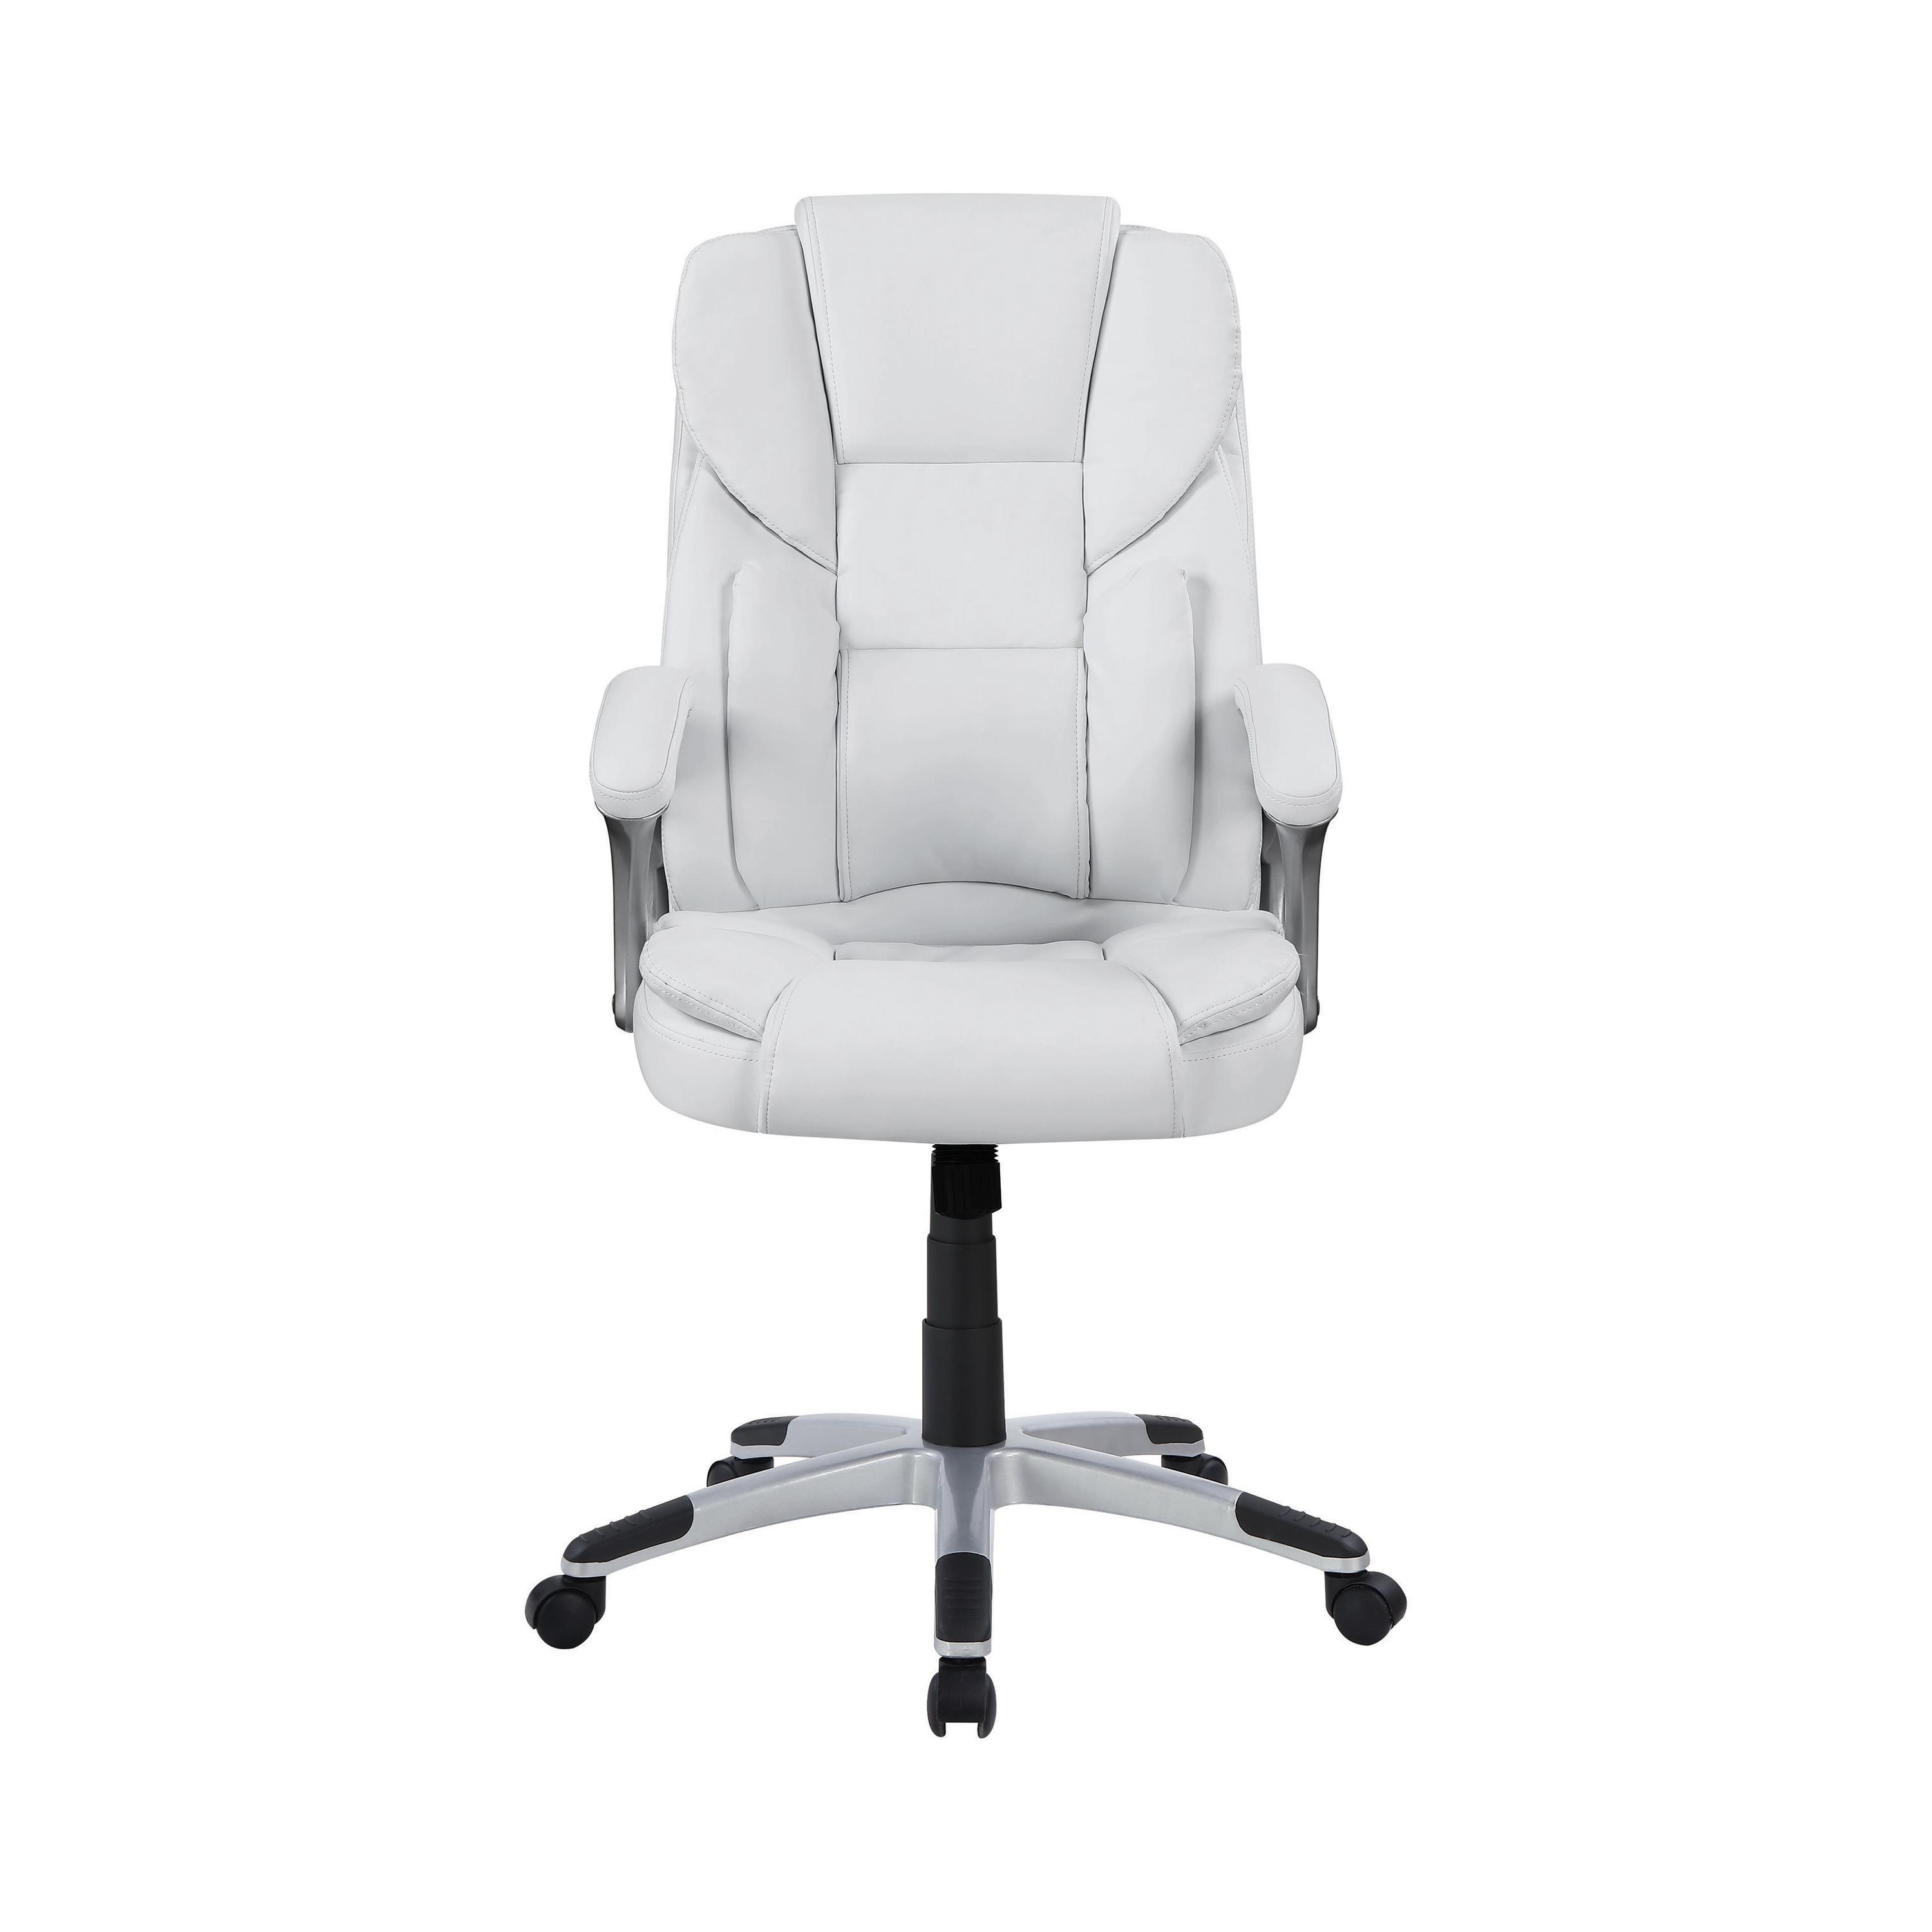 Contemporary Office Chair 801140 801140 in White Leatherette